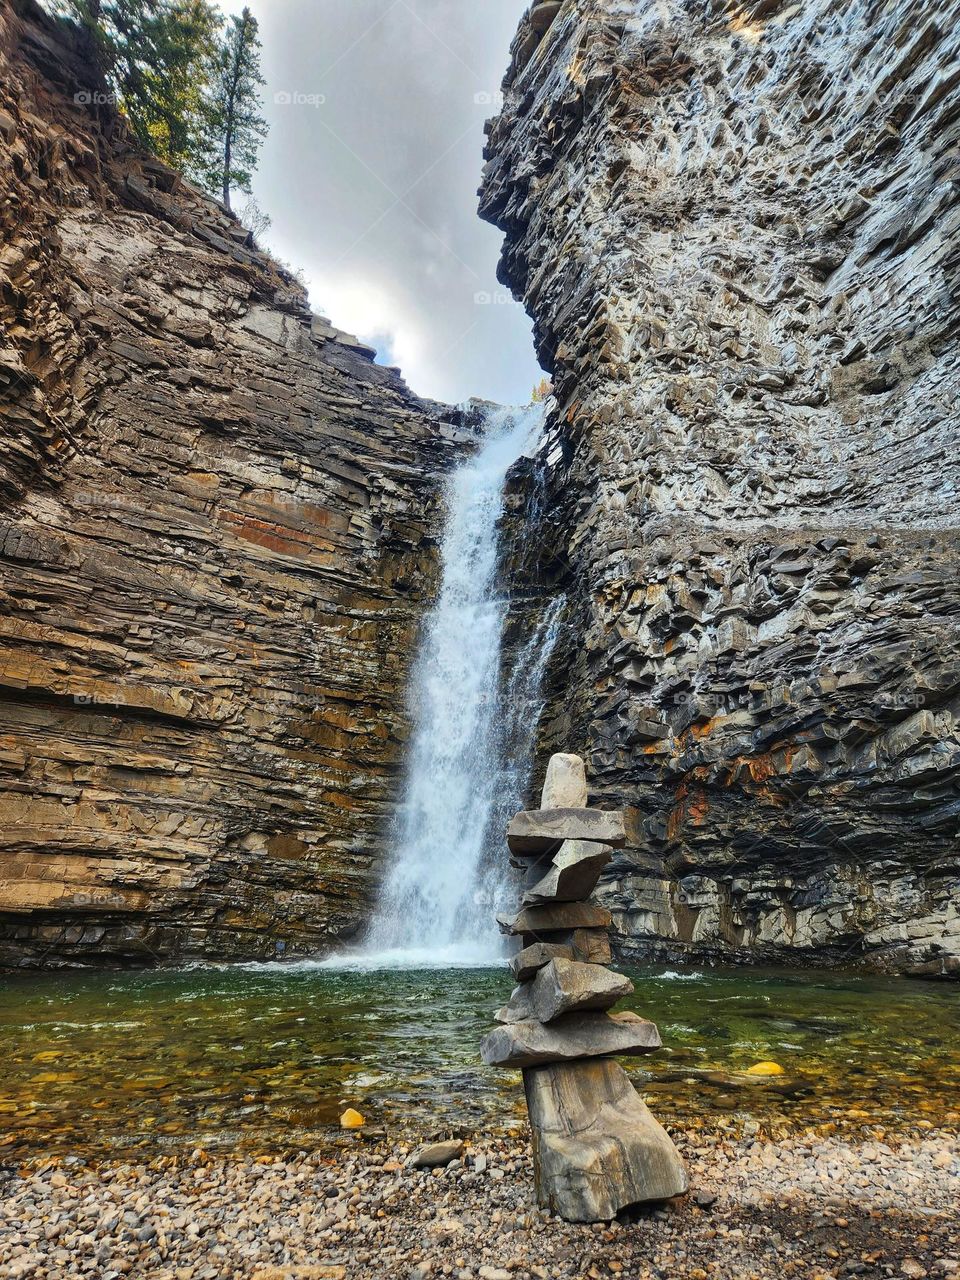 Rock stacking at the base of a mighty waterfall